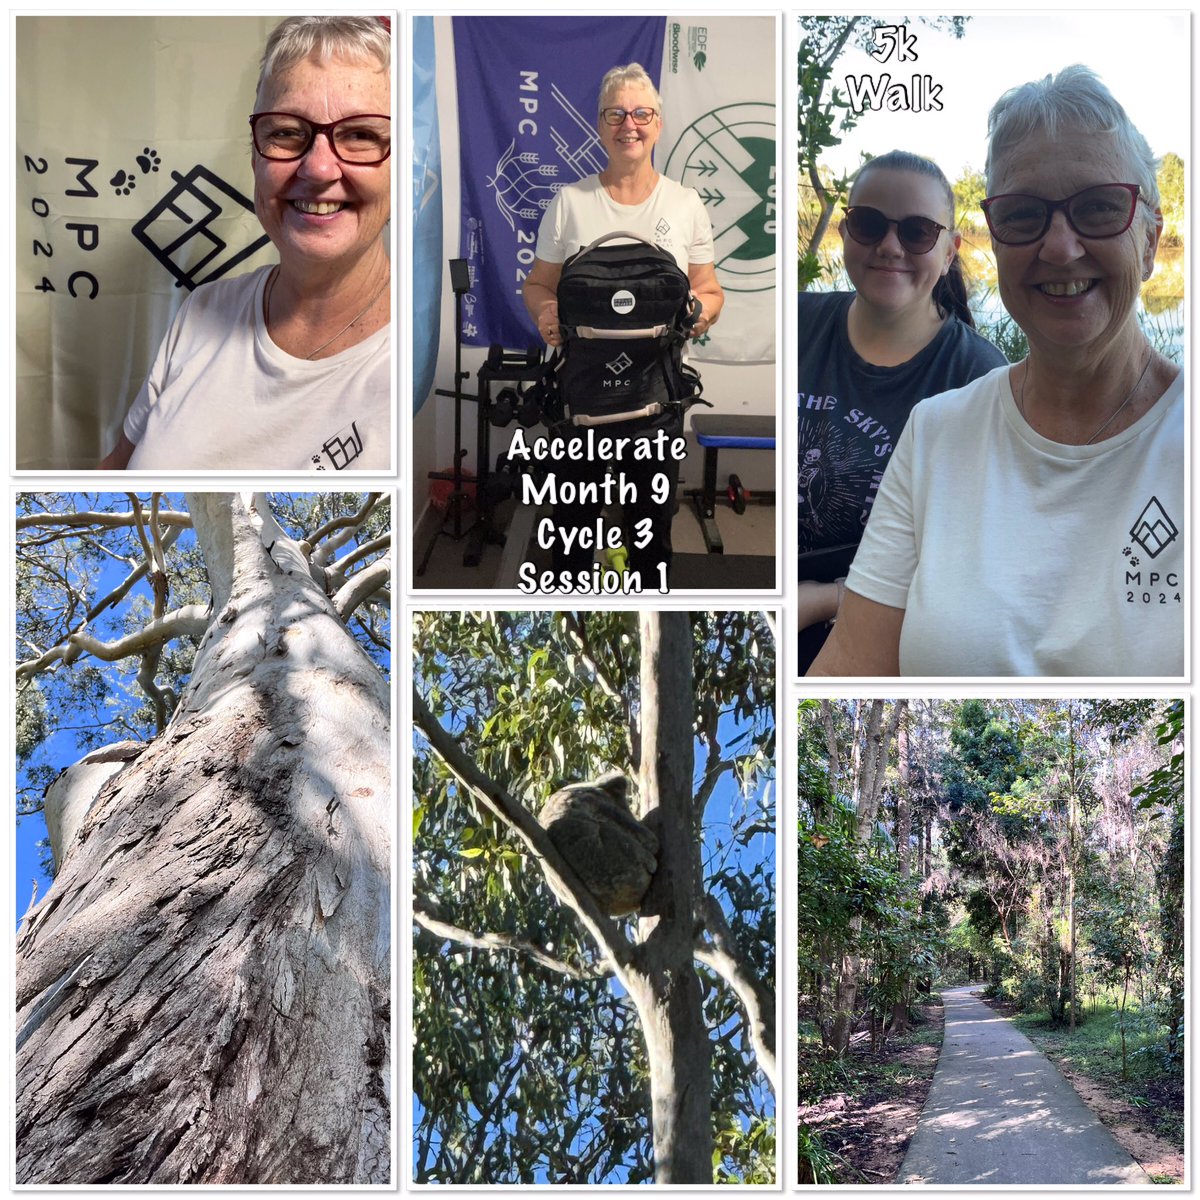 A 5k morning walk with Danielle around Alexander Clark Park 🐨 then when I got home I started Cycle 3 of Accelerate Month 9 with Session 1 completed and I must admit I was spent 🥵🥵 when I finished. #MPC2024 #aussiepeaker @MyPeakChallenge